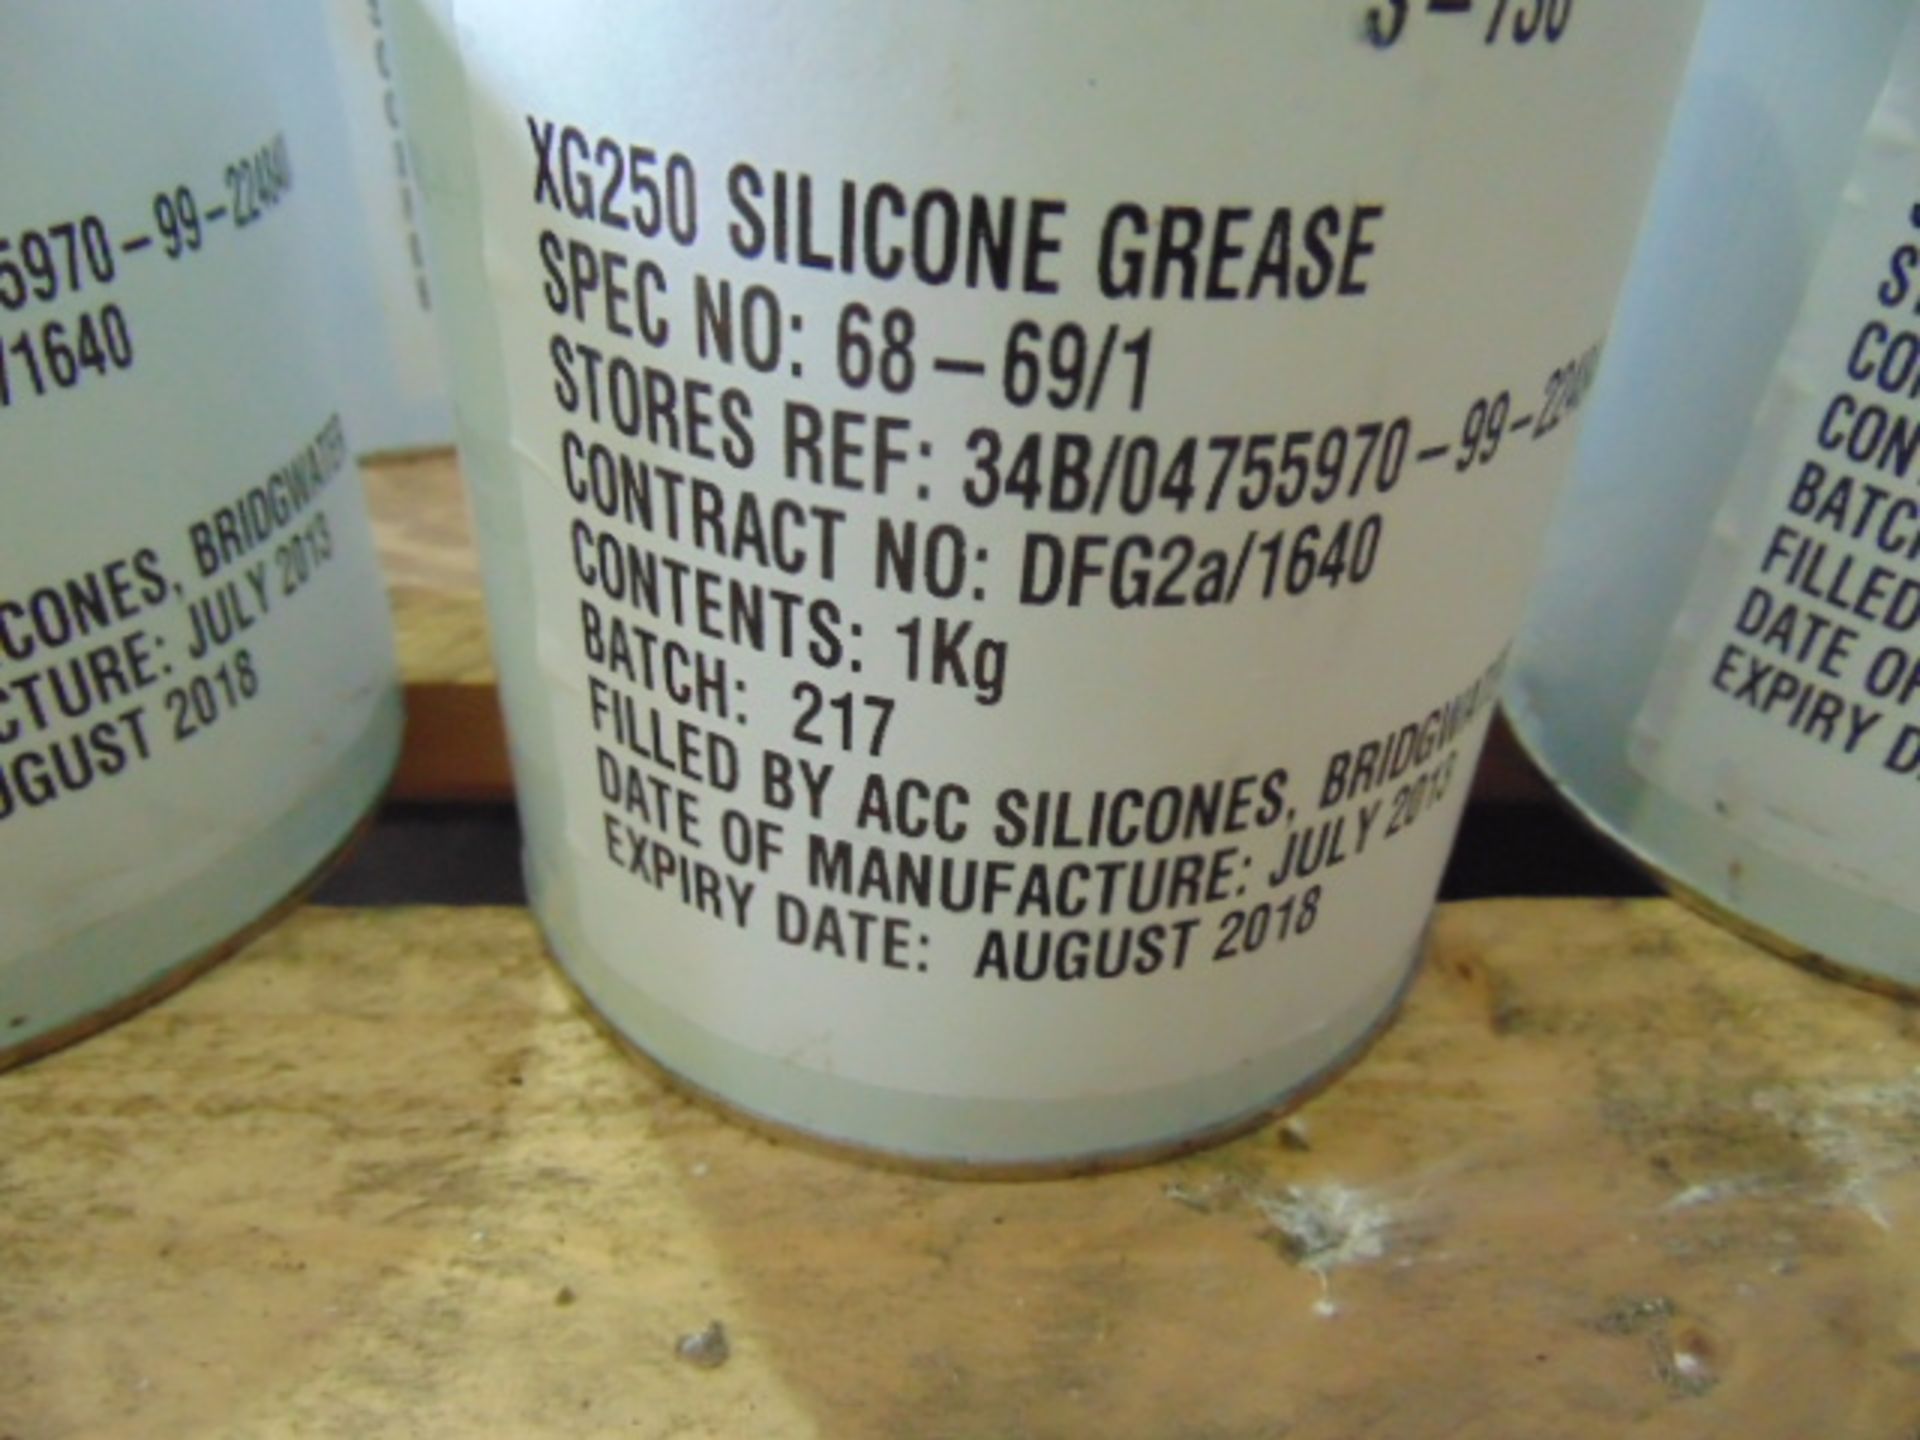 Qty 24 x 1Kg XG250 Silicone Grease direct from reserve stores - Image 2 of 2